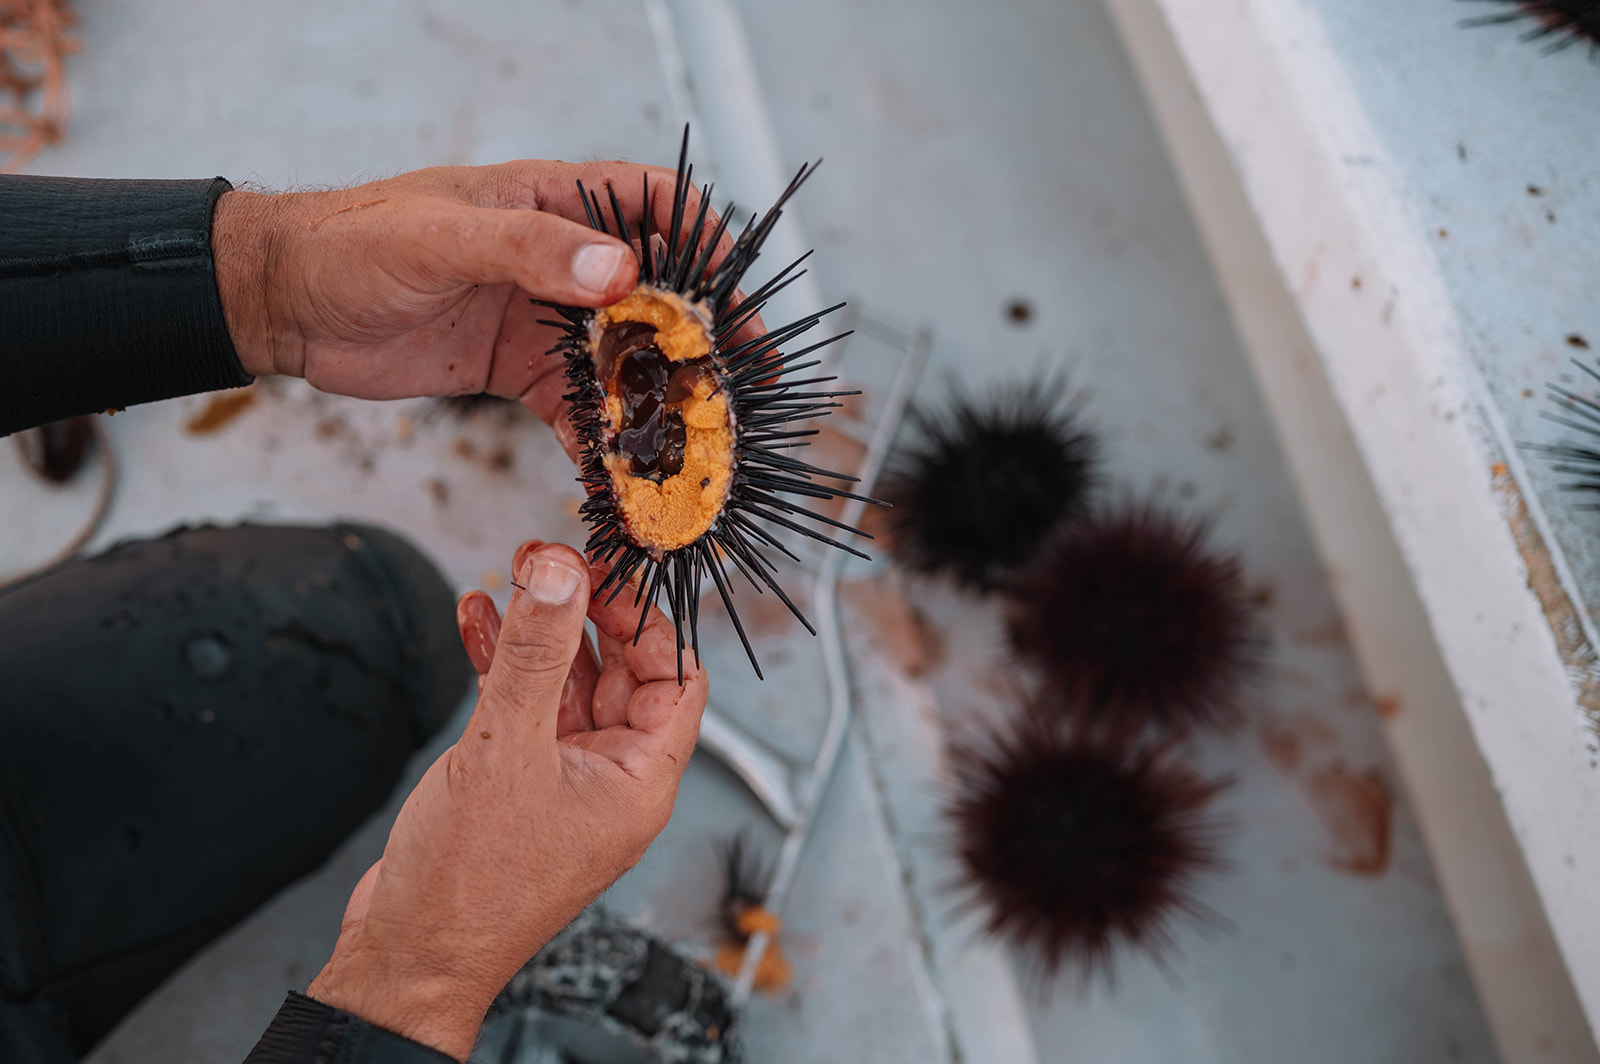 Diver opening up a urchin